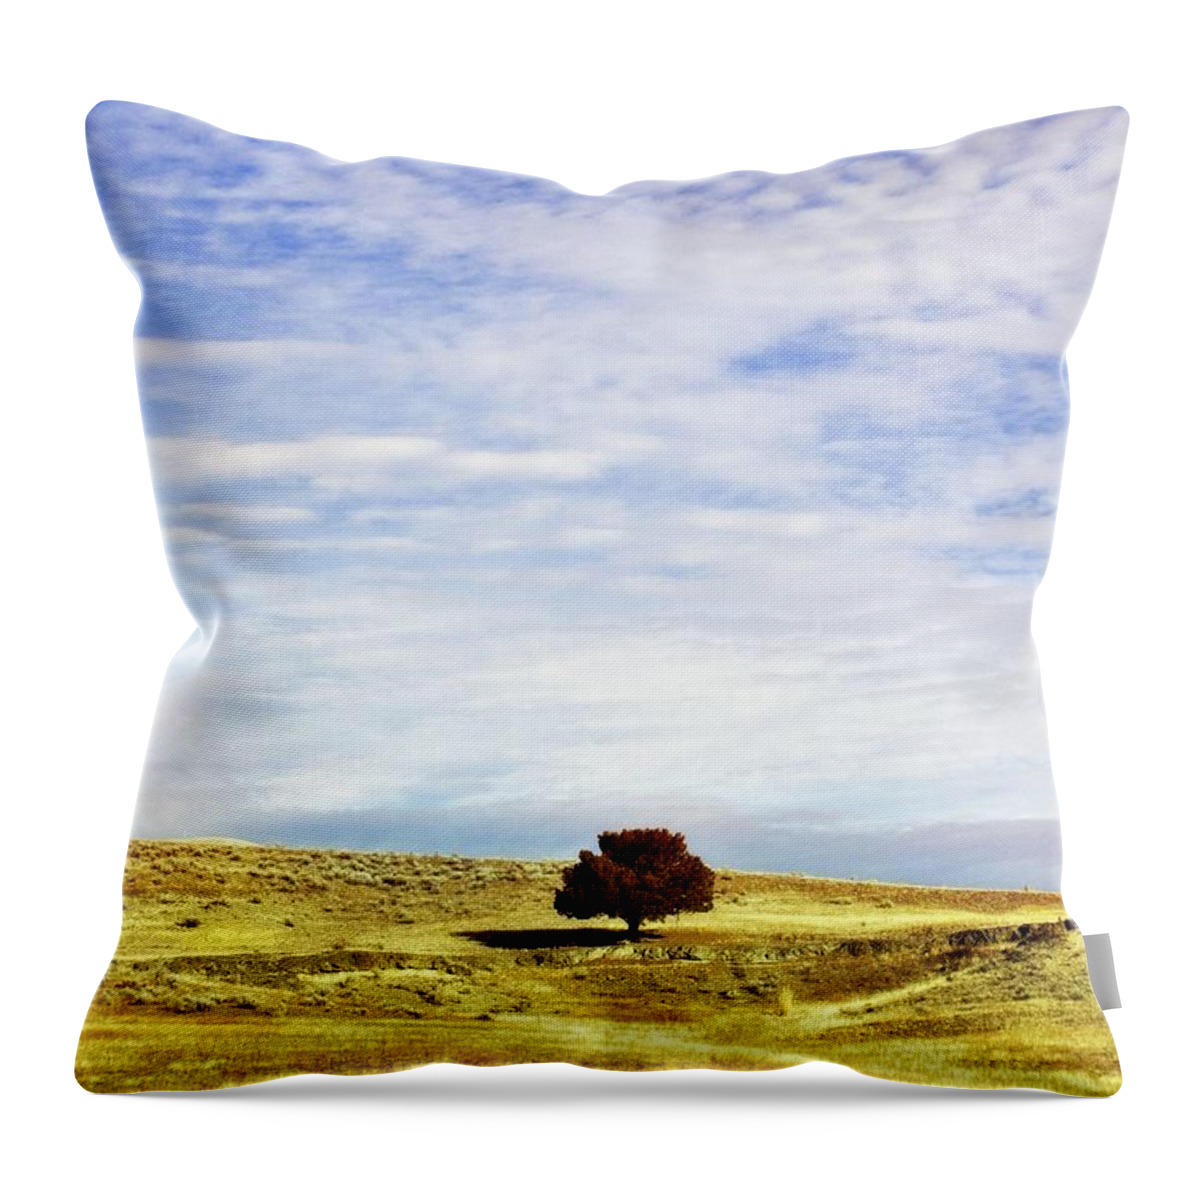 Tranquility Throw Pillow featuring the photograph Be Able To Be Alone. Lose Not The by Darrell Wyatt